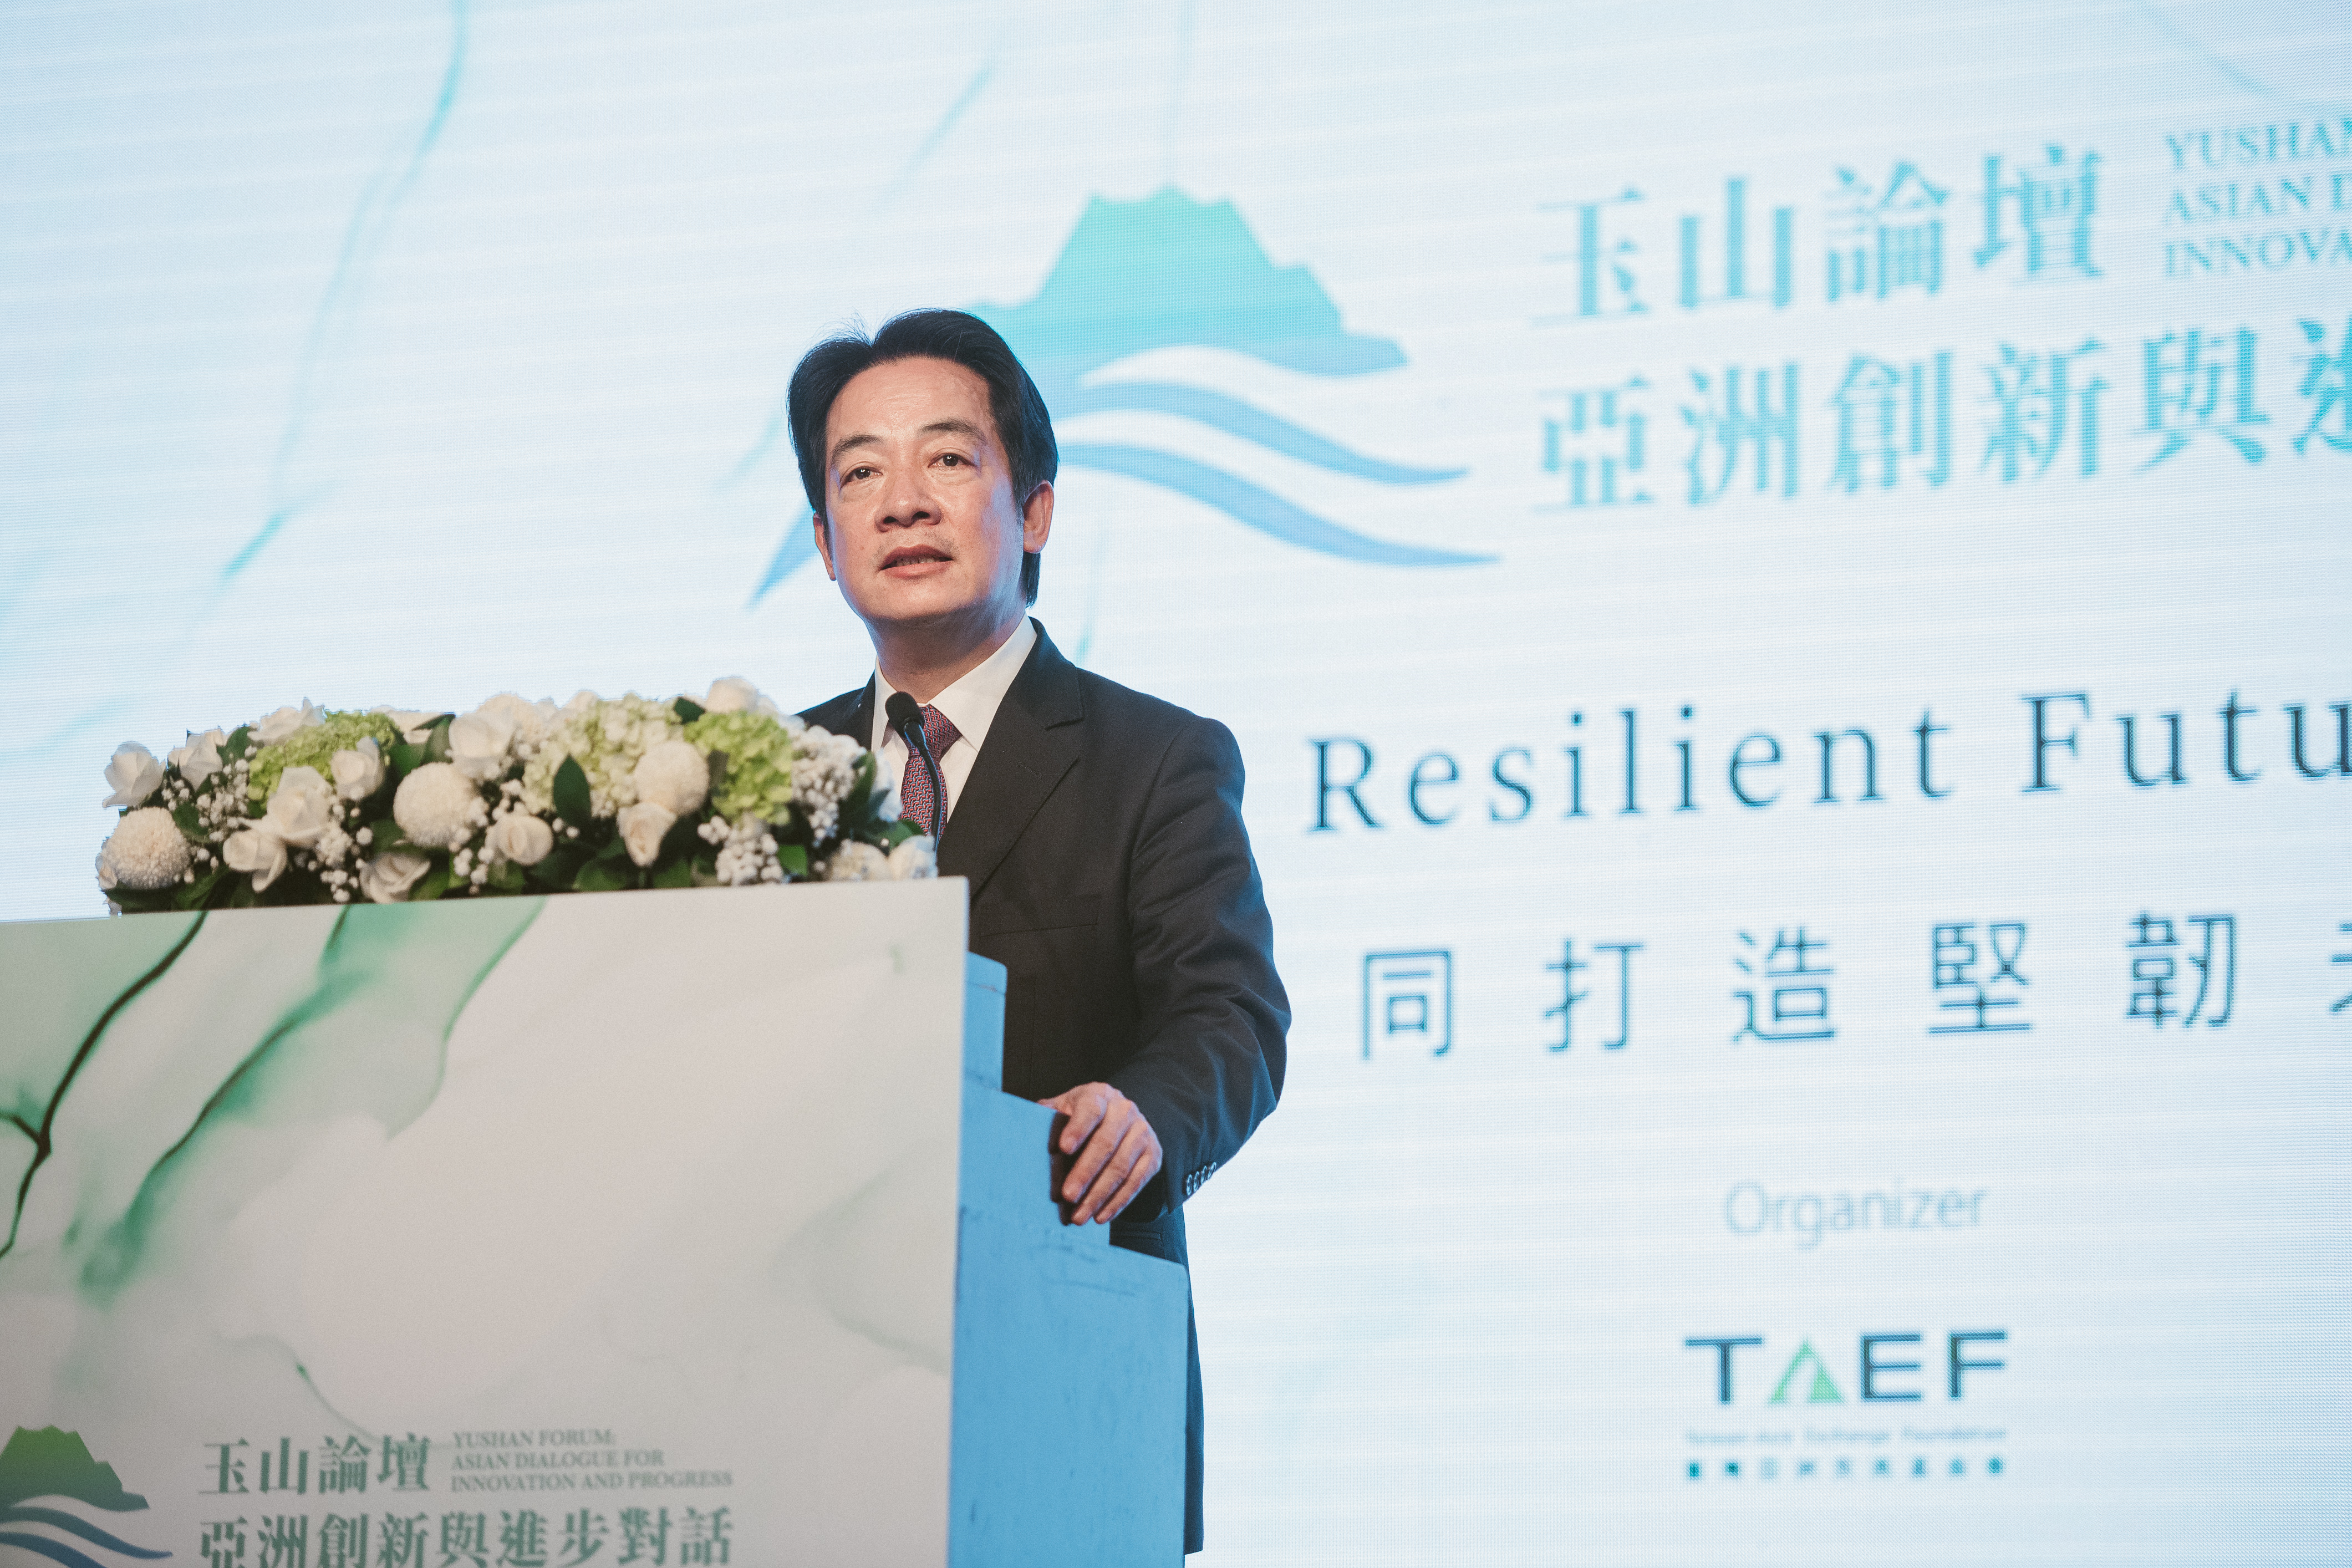 H.E. Lai Ching Te, the Vice President of R.O.C. (Taiwan) gives speech.